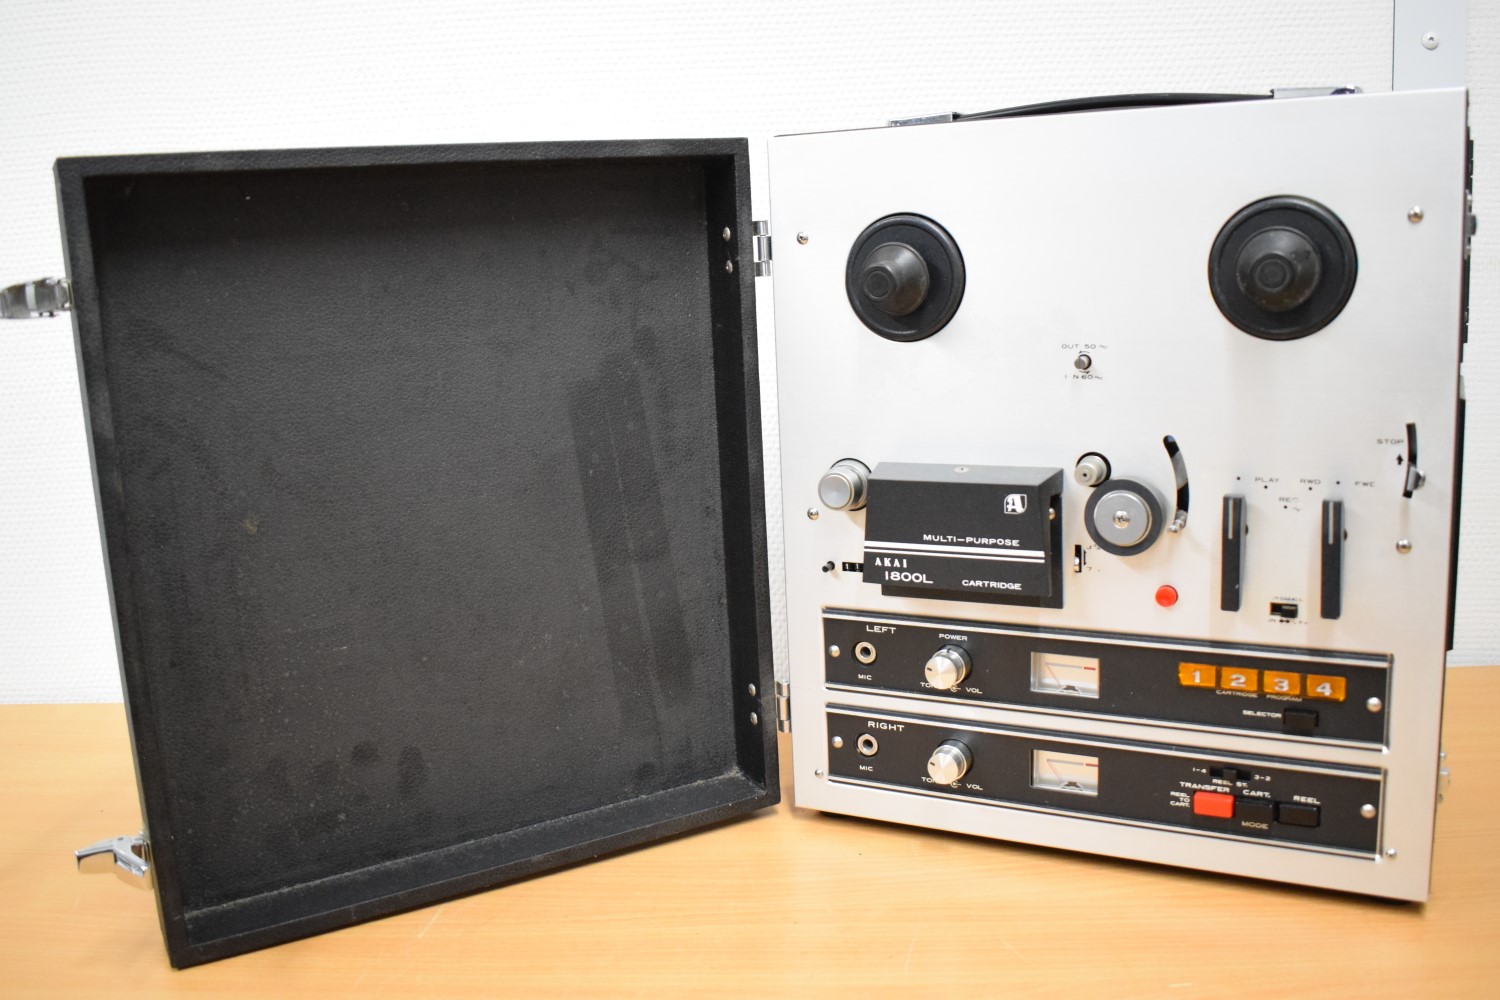 Akai 1800L Tape Recorder with build-in 8Track player